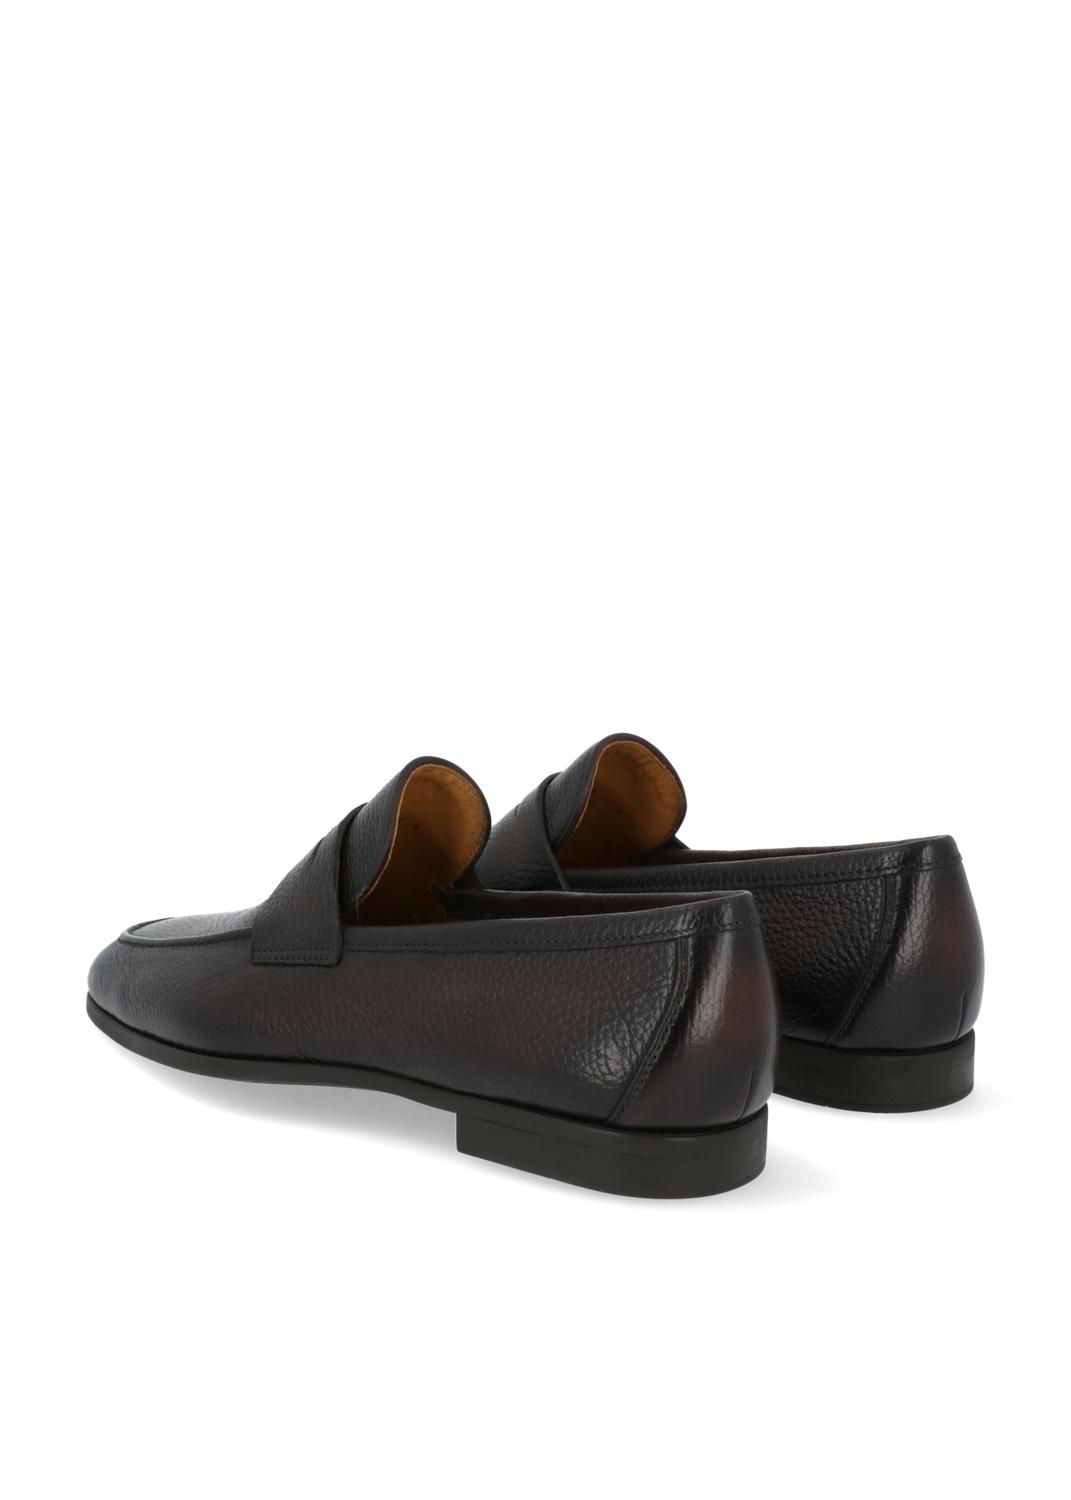 Magnanni loafers Diezma II MGN-23802